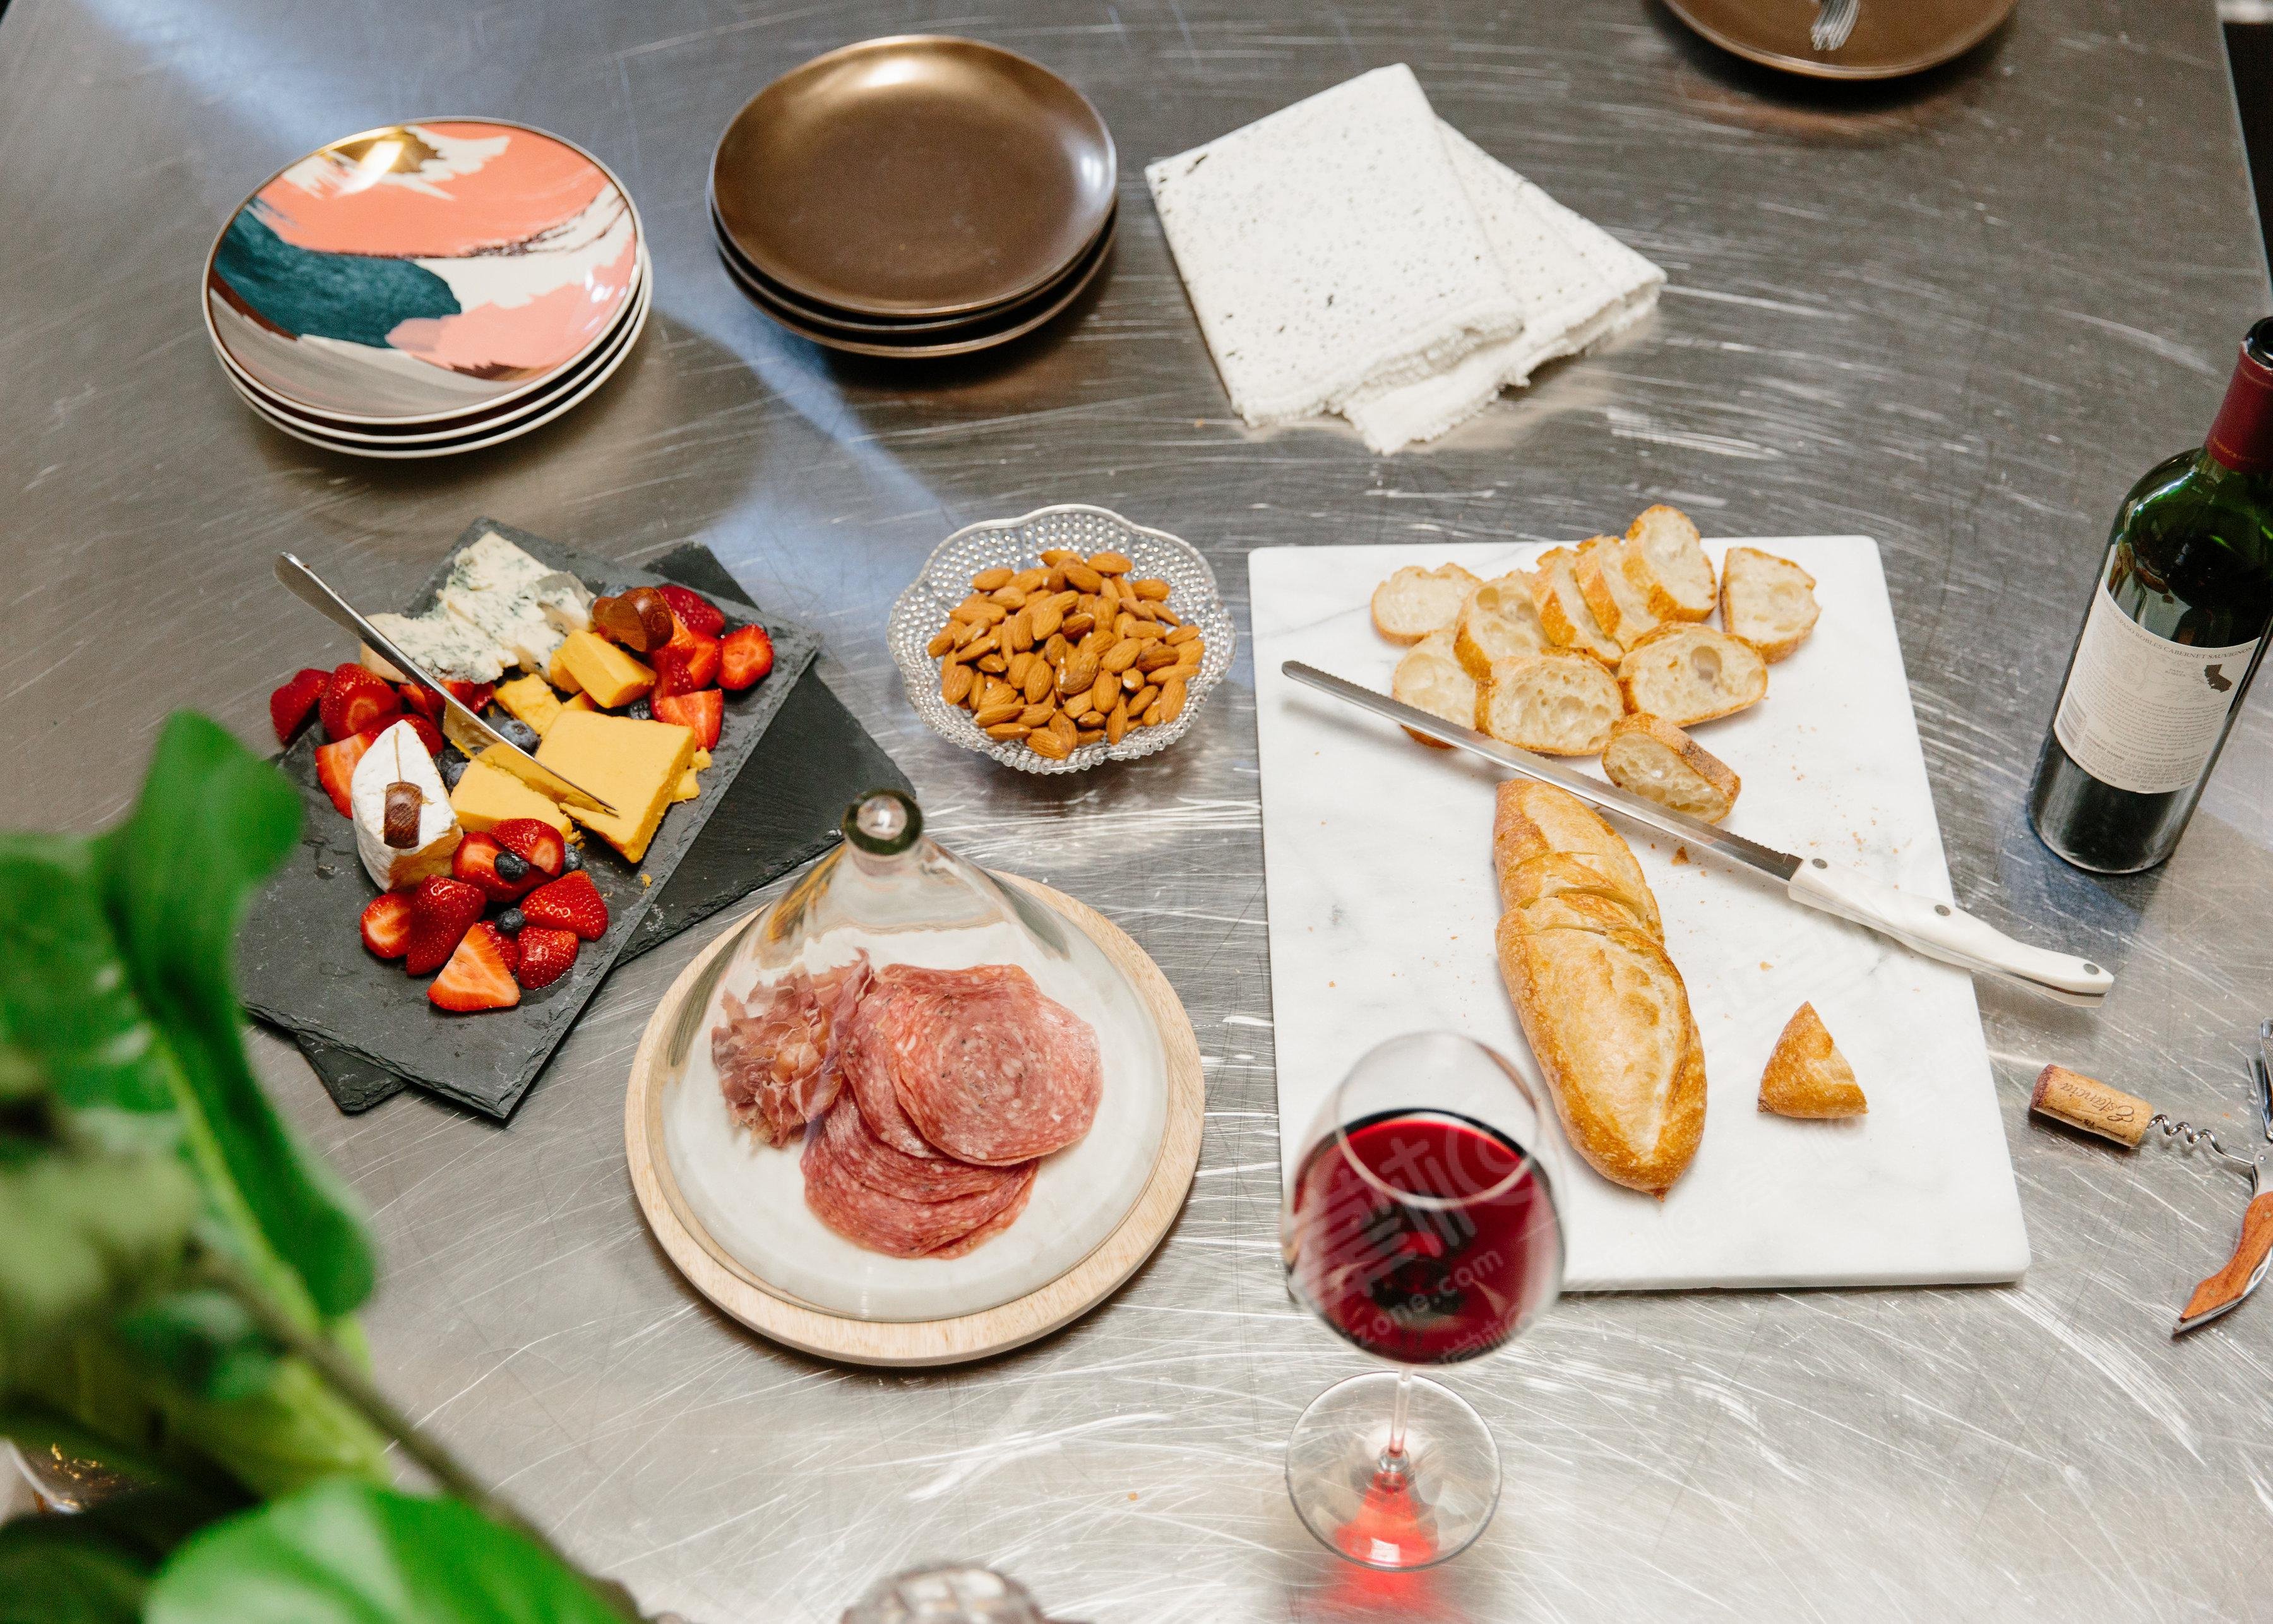 Mini Moments - A Chic, Intimate Space Designed to Inspire: Tastings l Demos l Pop-ups